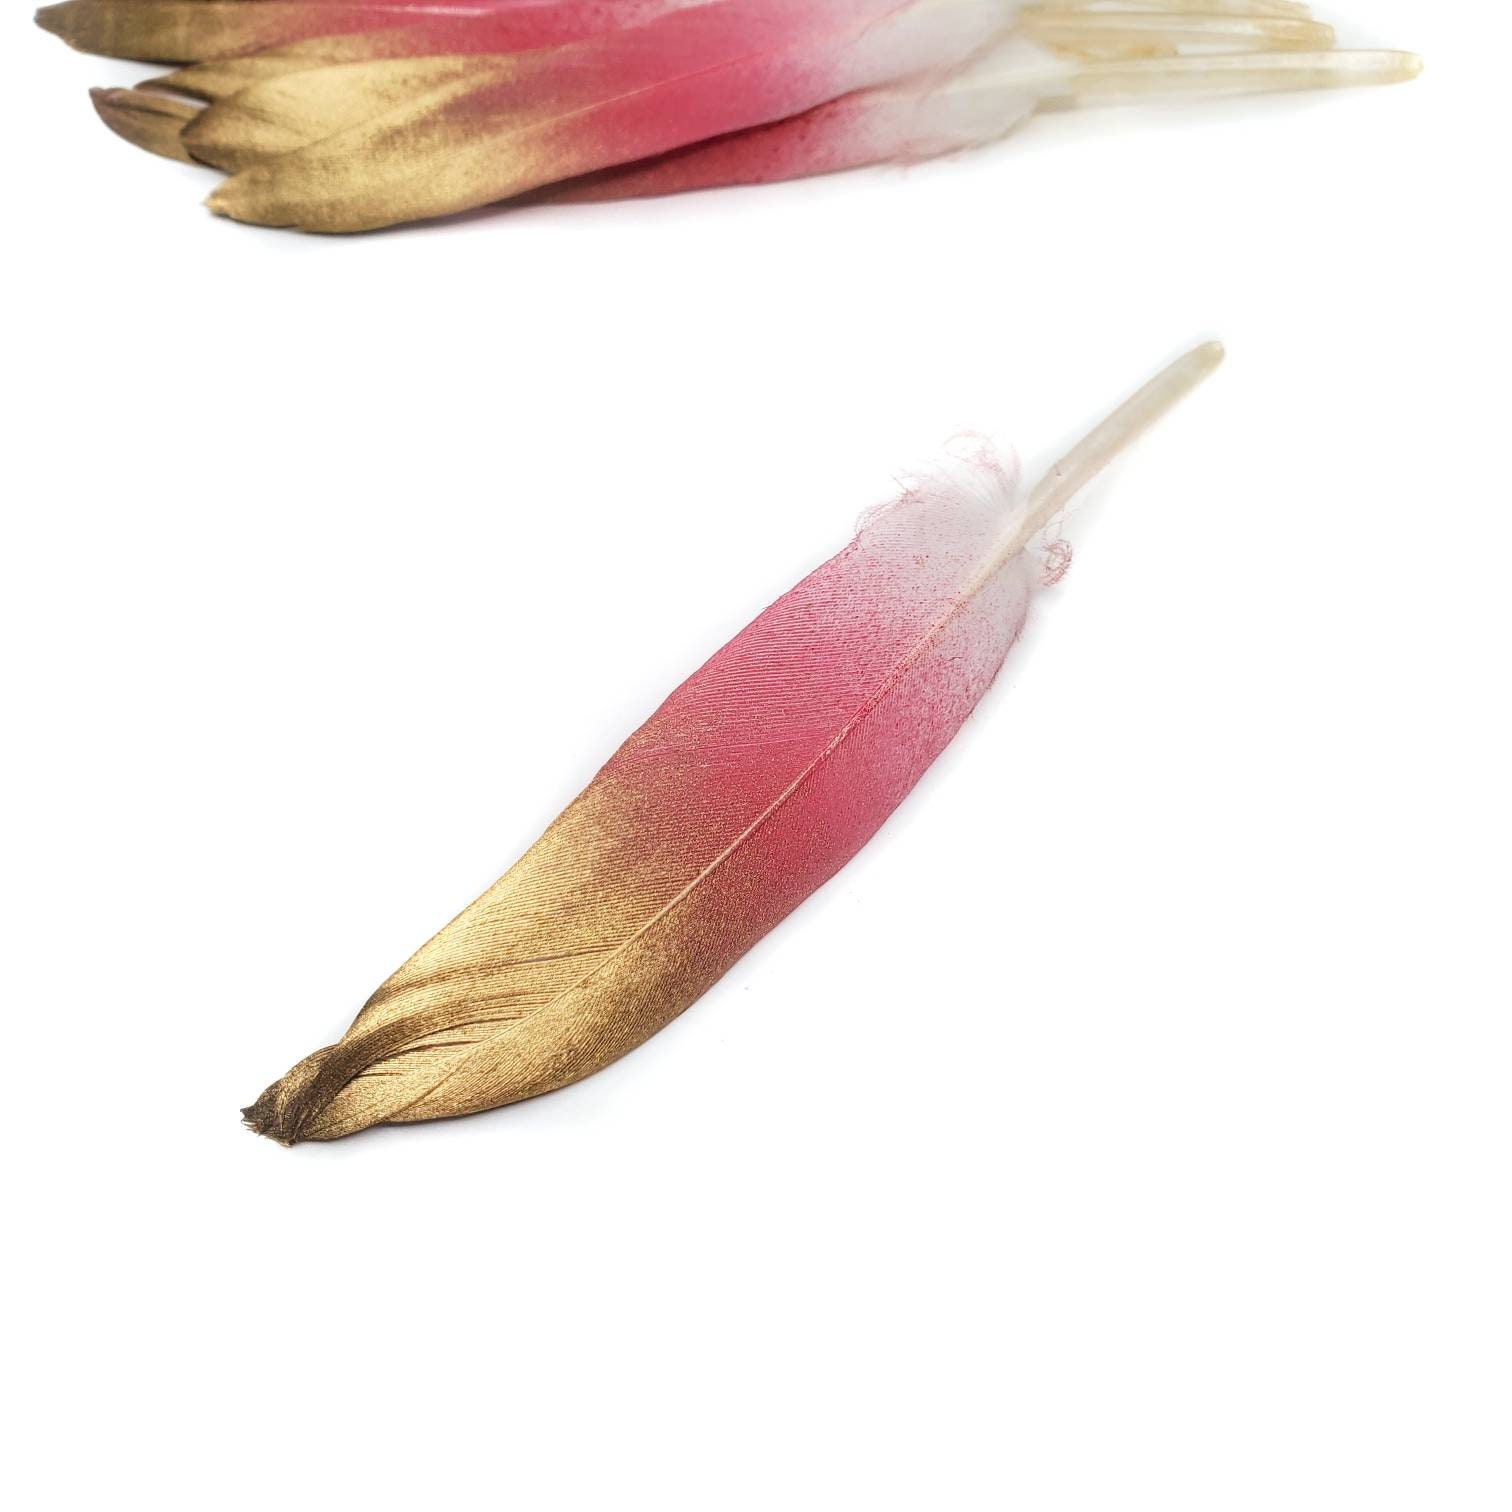 Assortment of Gold Tip Feathers, Pink Feathers, Black Feathers etc.